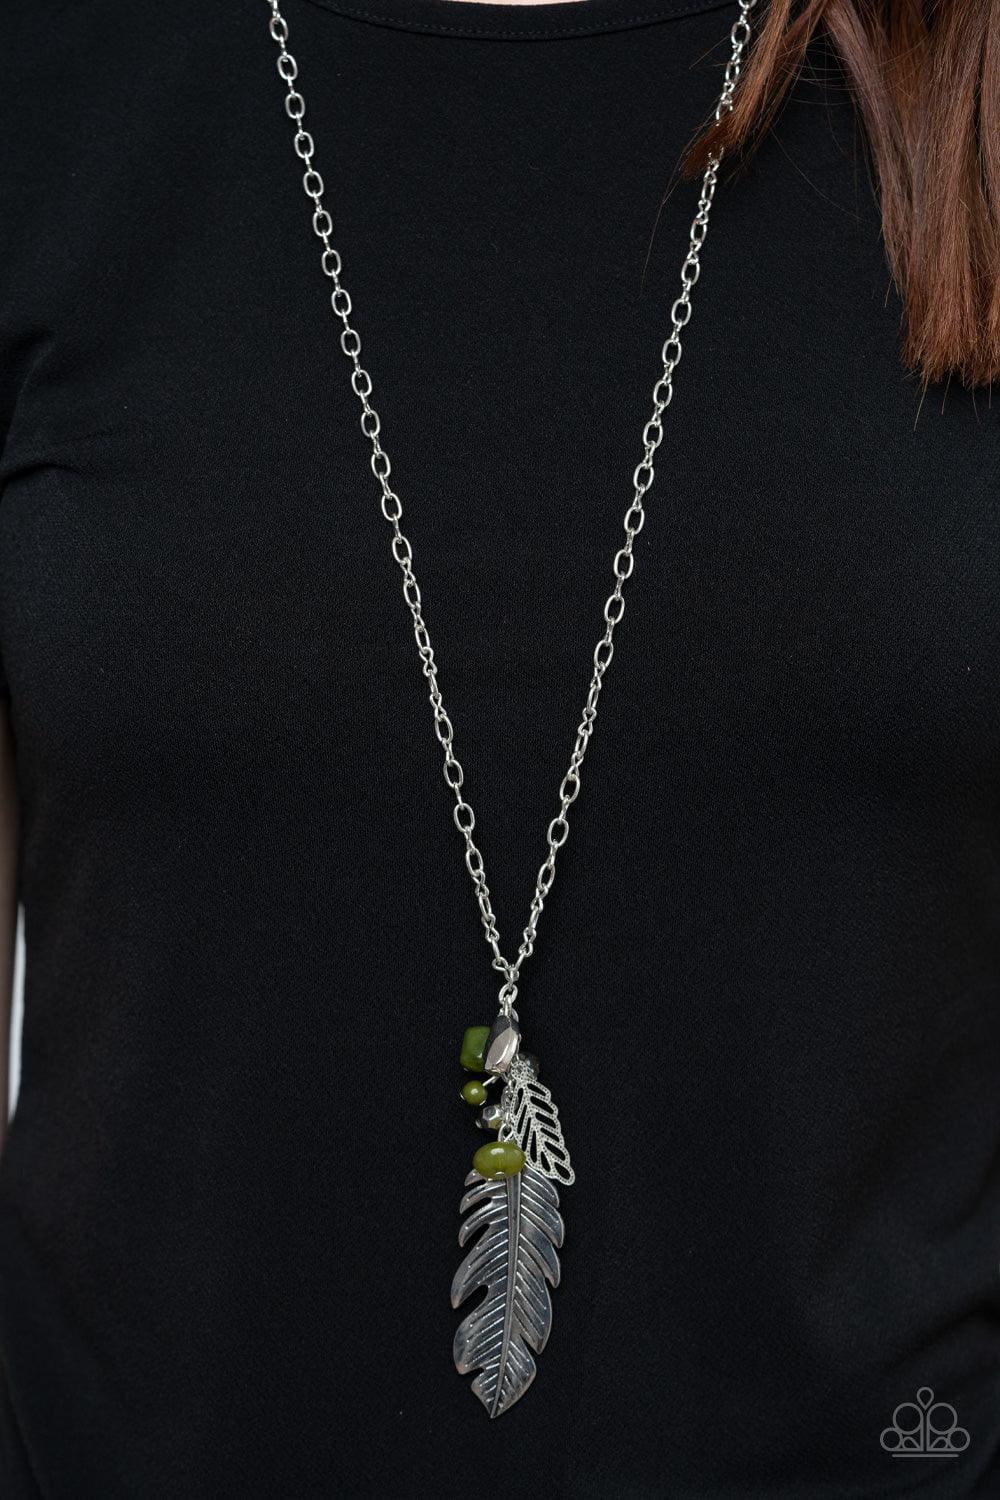 Paparazzi Accessories - Feather Flair - Green Necklace - Bling by JessieK